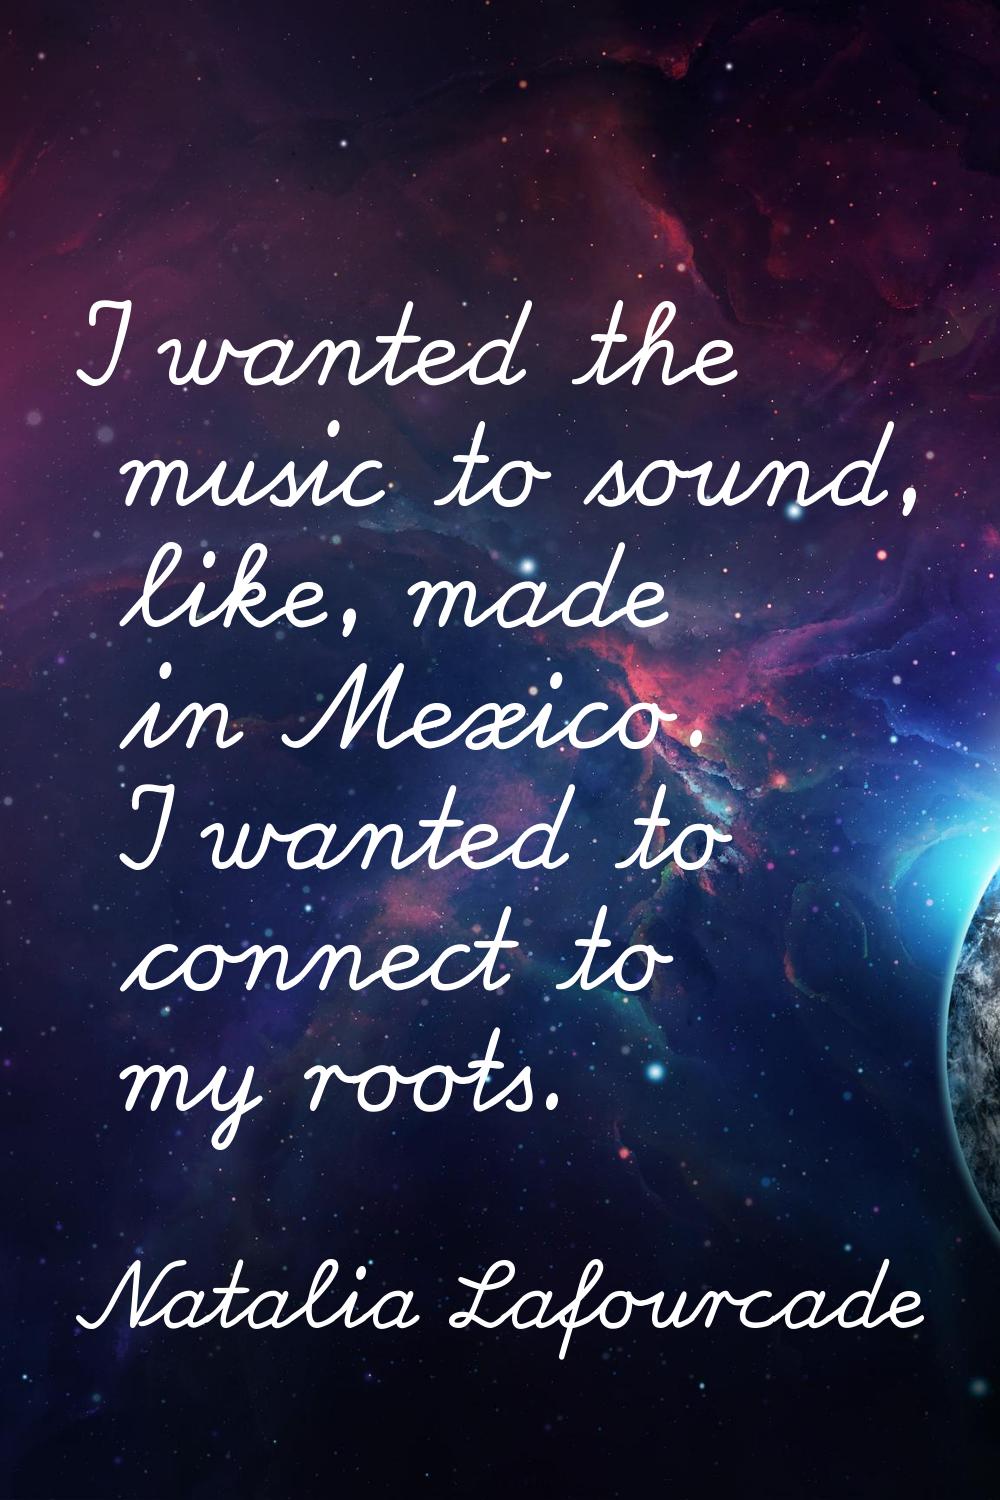 I wanted the music to sound, like, made in Mexico. I wanted to connect to my roots.